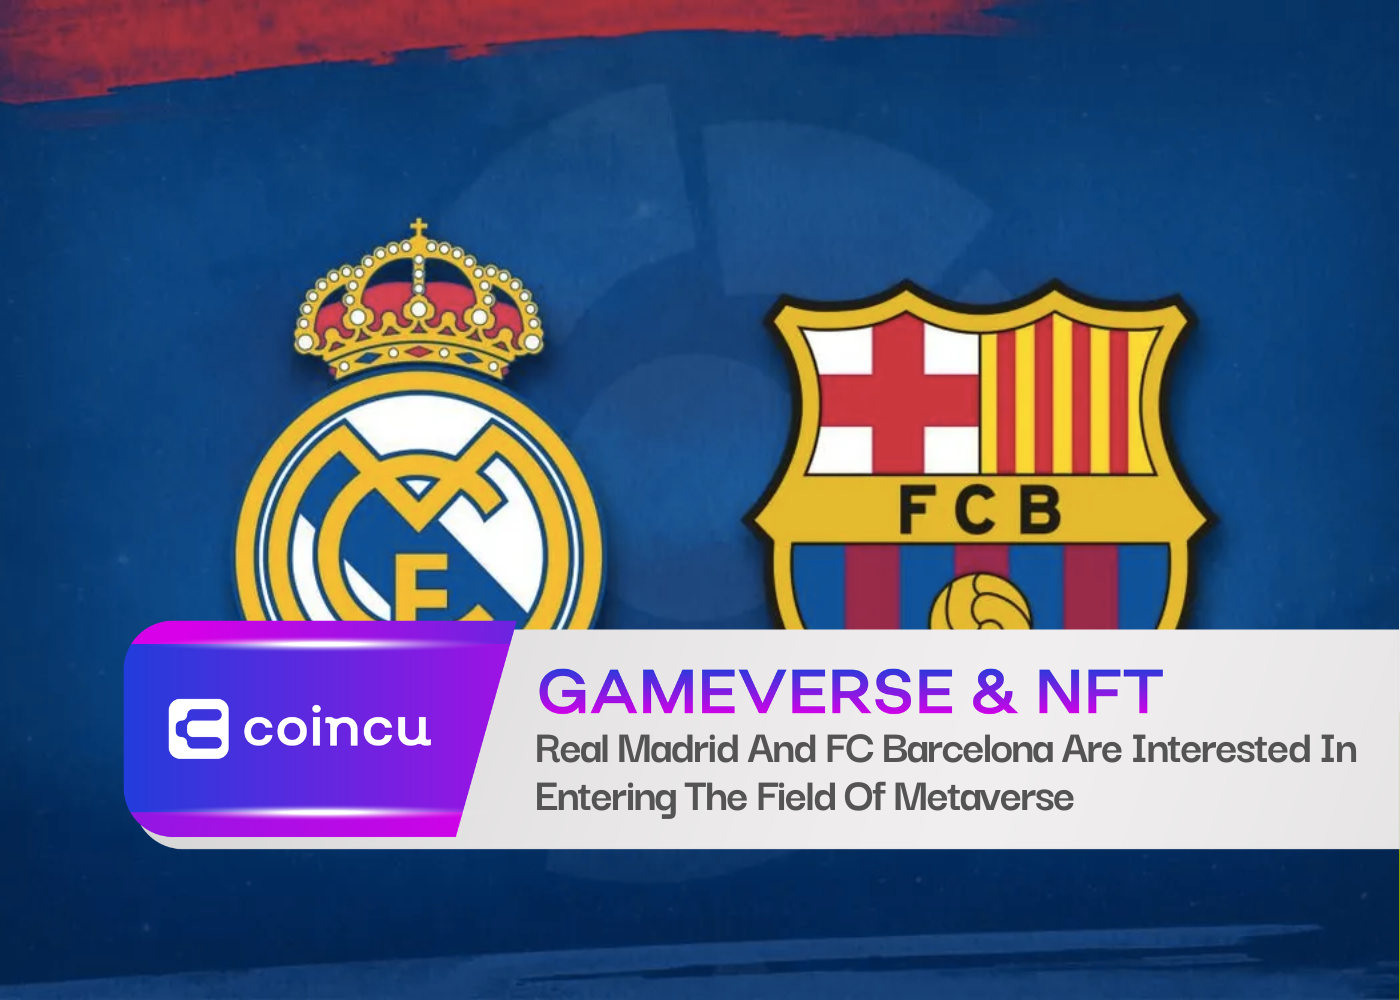 Real Madrid And FC Barcelona Are Interested In Entering The Field Of Metaverse